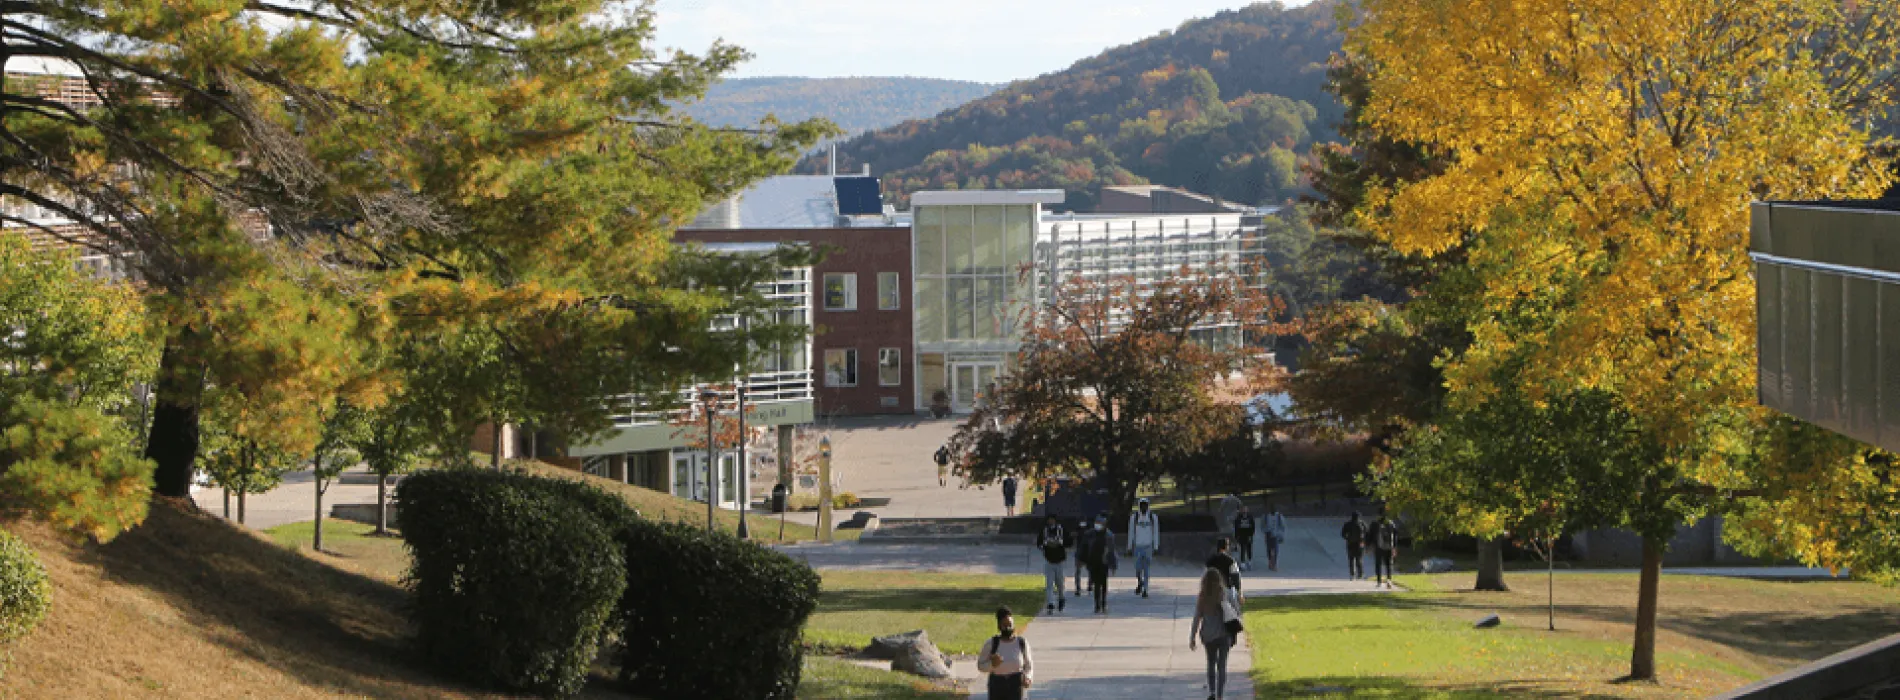 Image of campus from afar in foliage